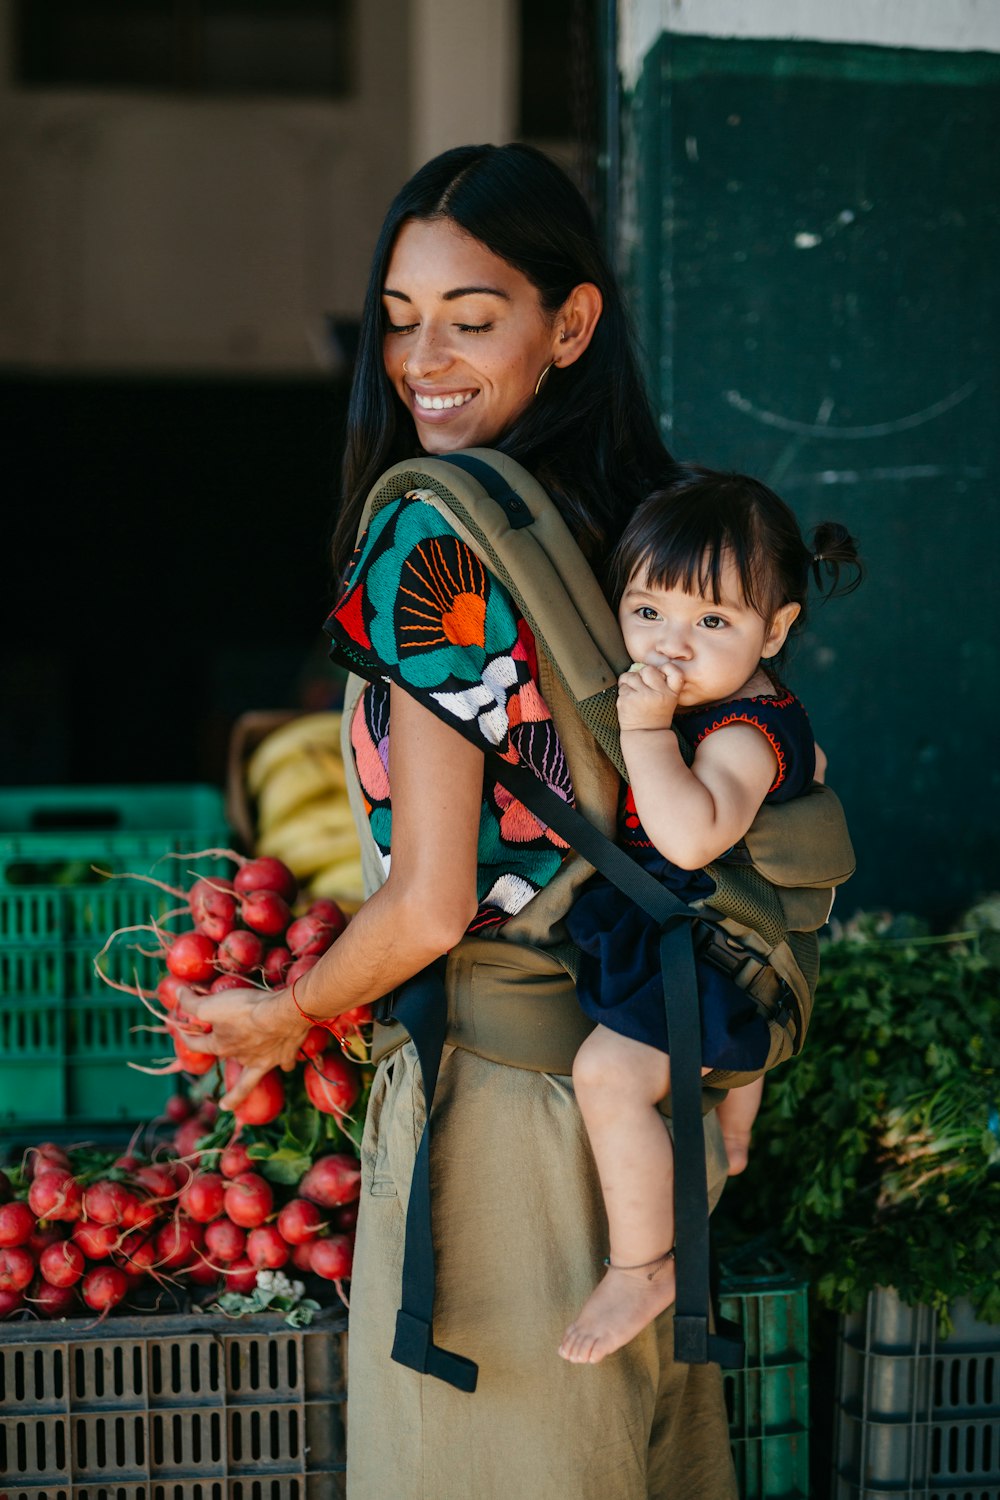 a woman carrying a child in a baby carrier